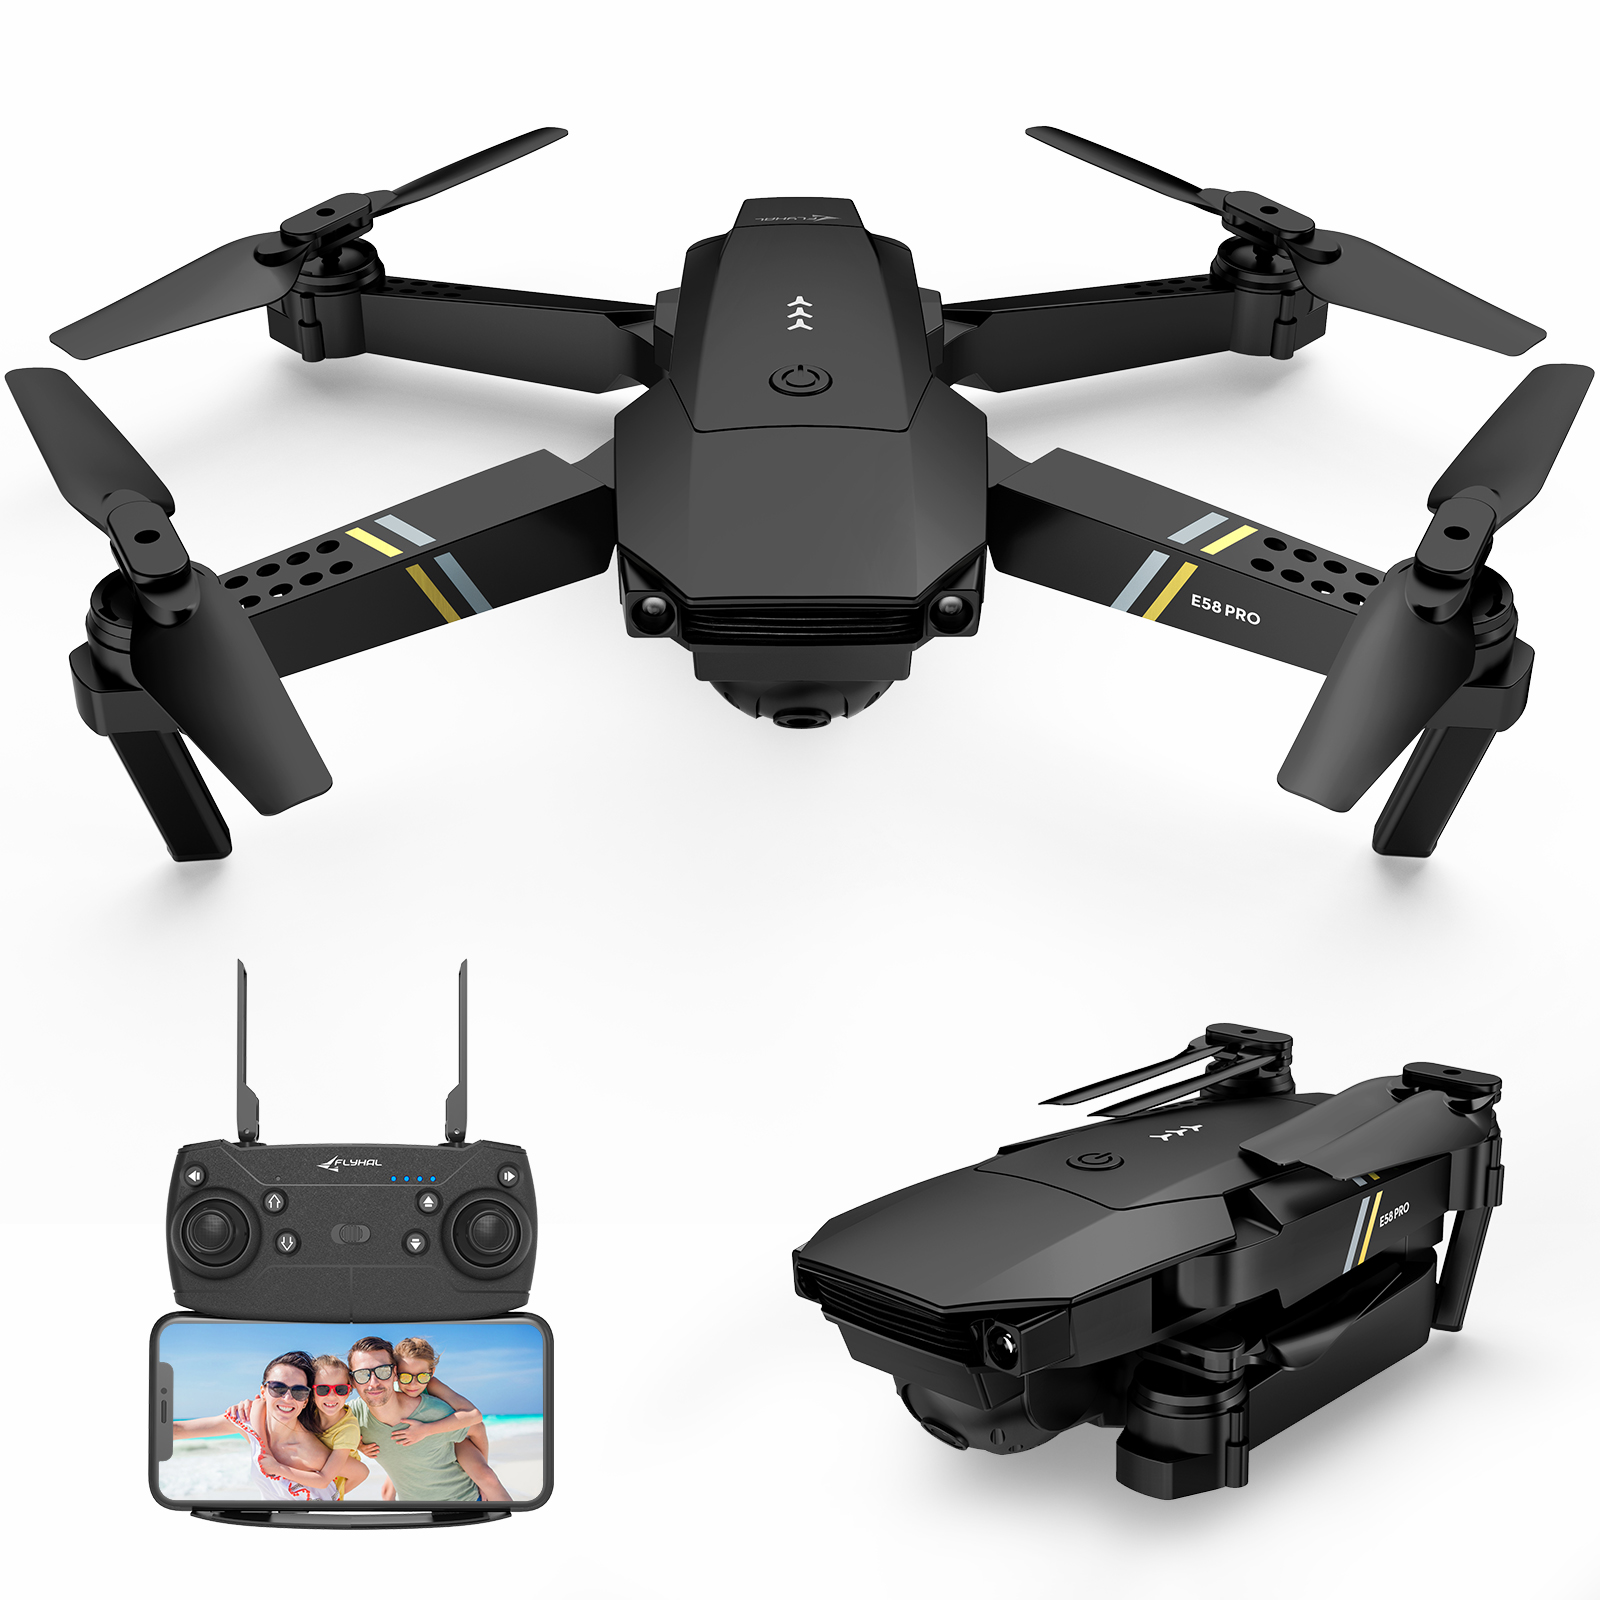 Find FLYHAL E58 PRO WIFI FPV With 120Â° FOV 1080P HD Camera Adjustment Angle High Hold Mode Foldable RC Drone Quadcopter RTF for Sale on Gipsybee.com with cryptocurrencies